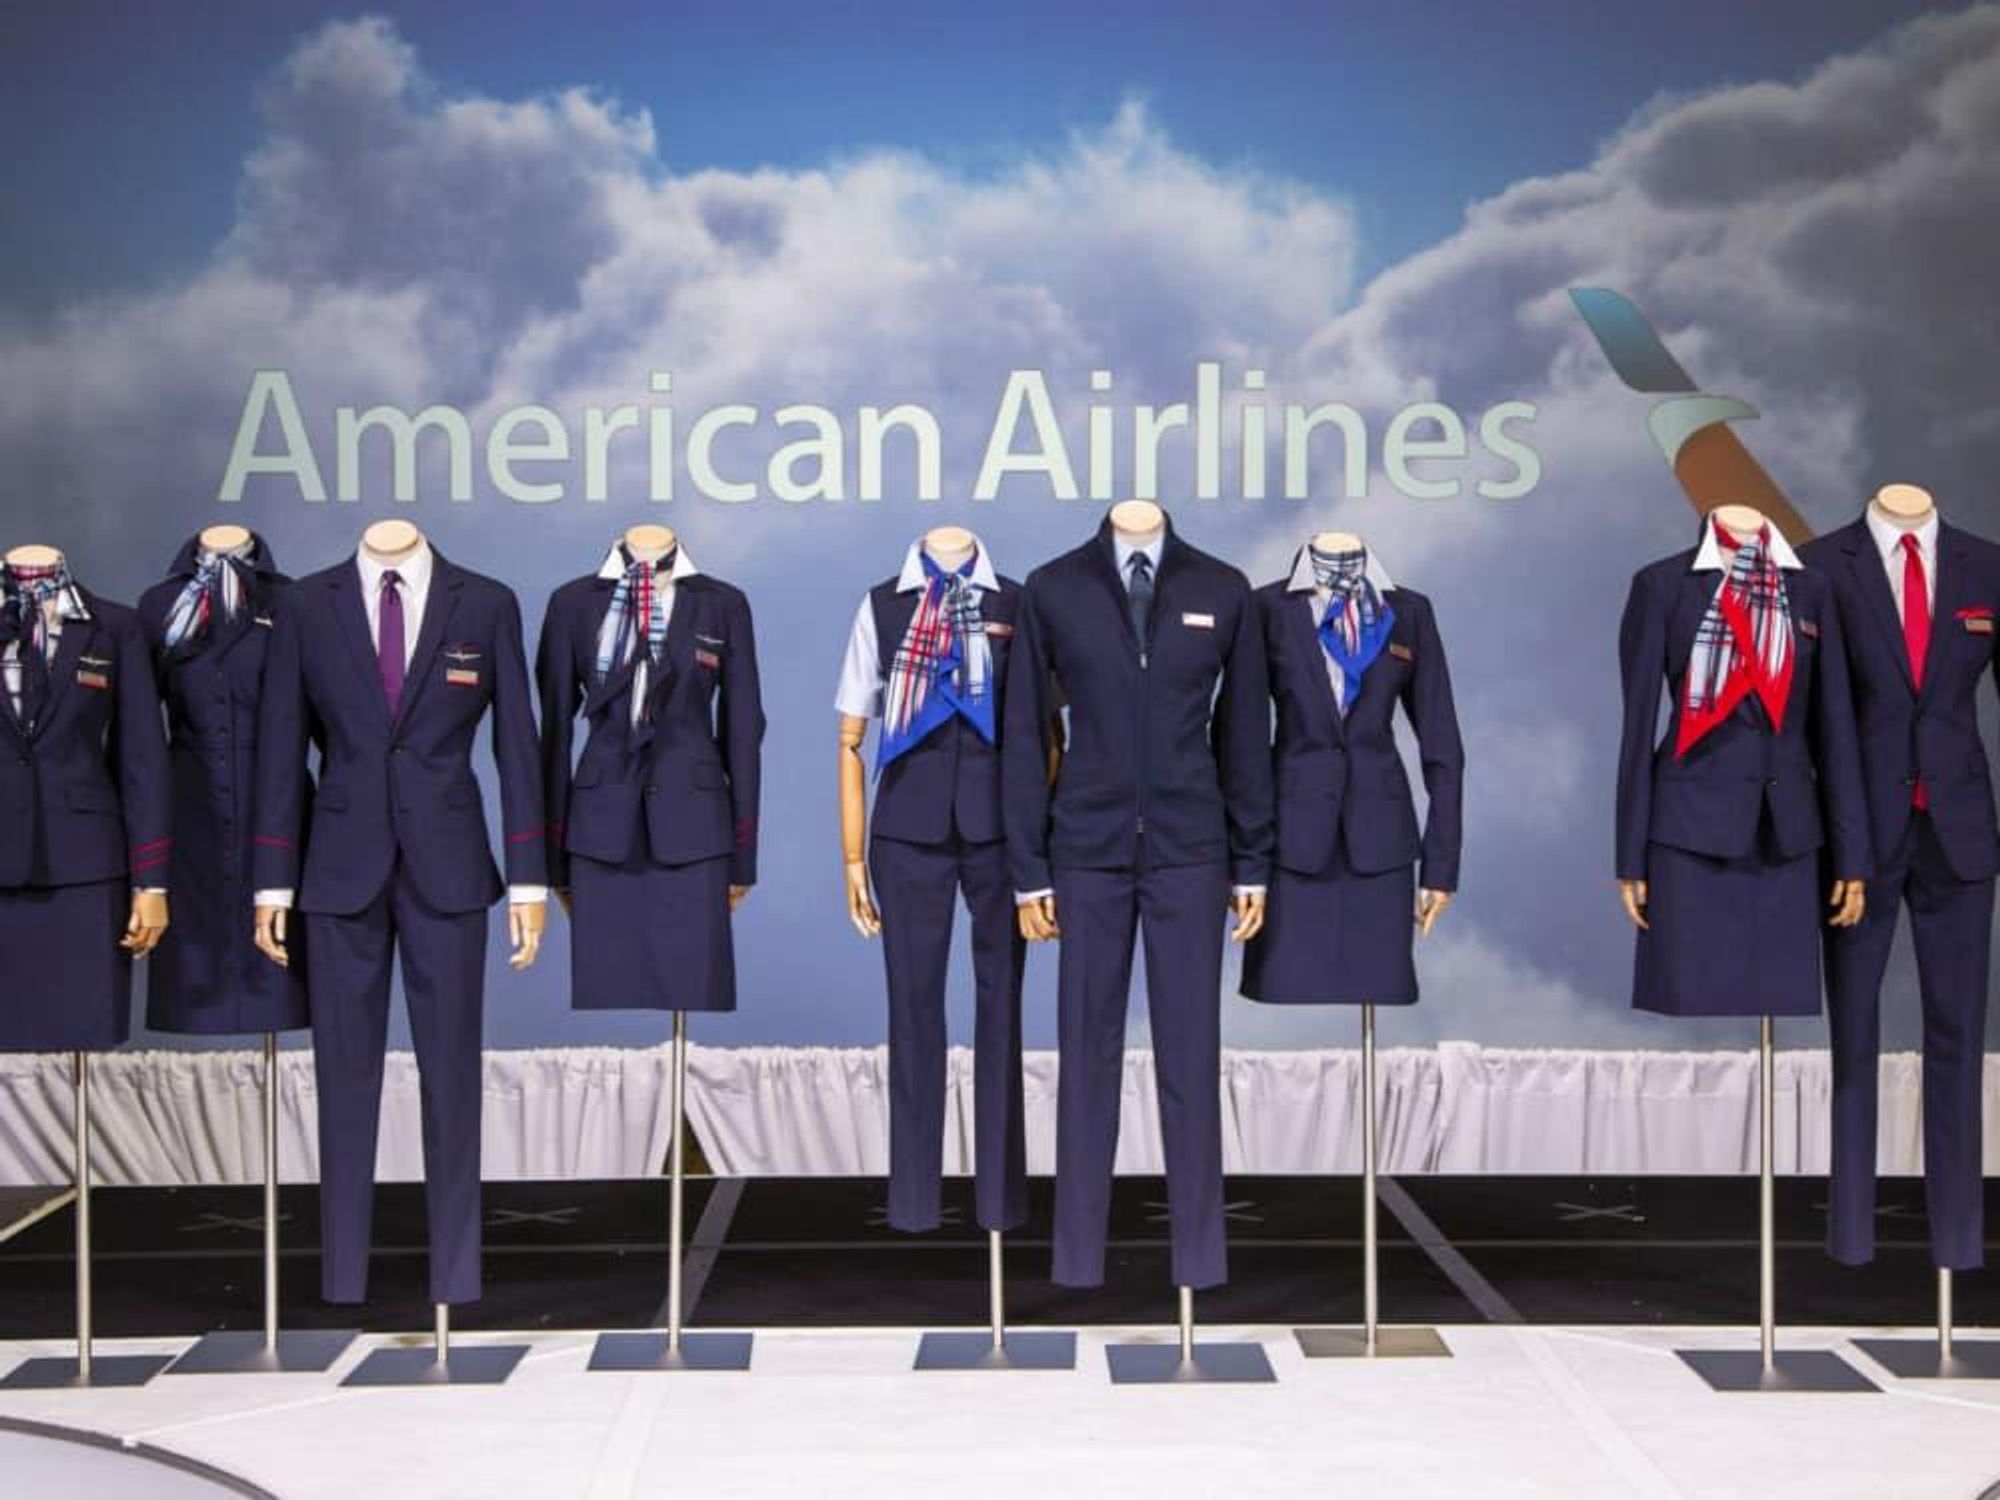 American Airlines uniforms